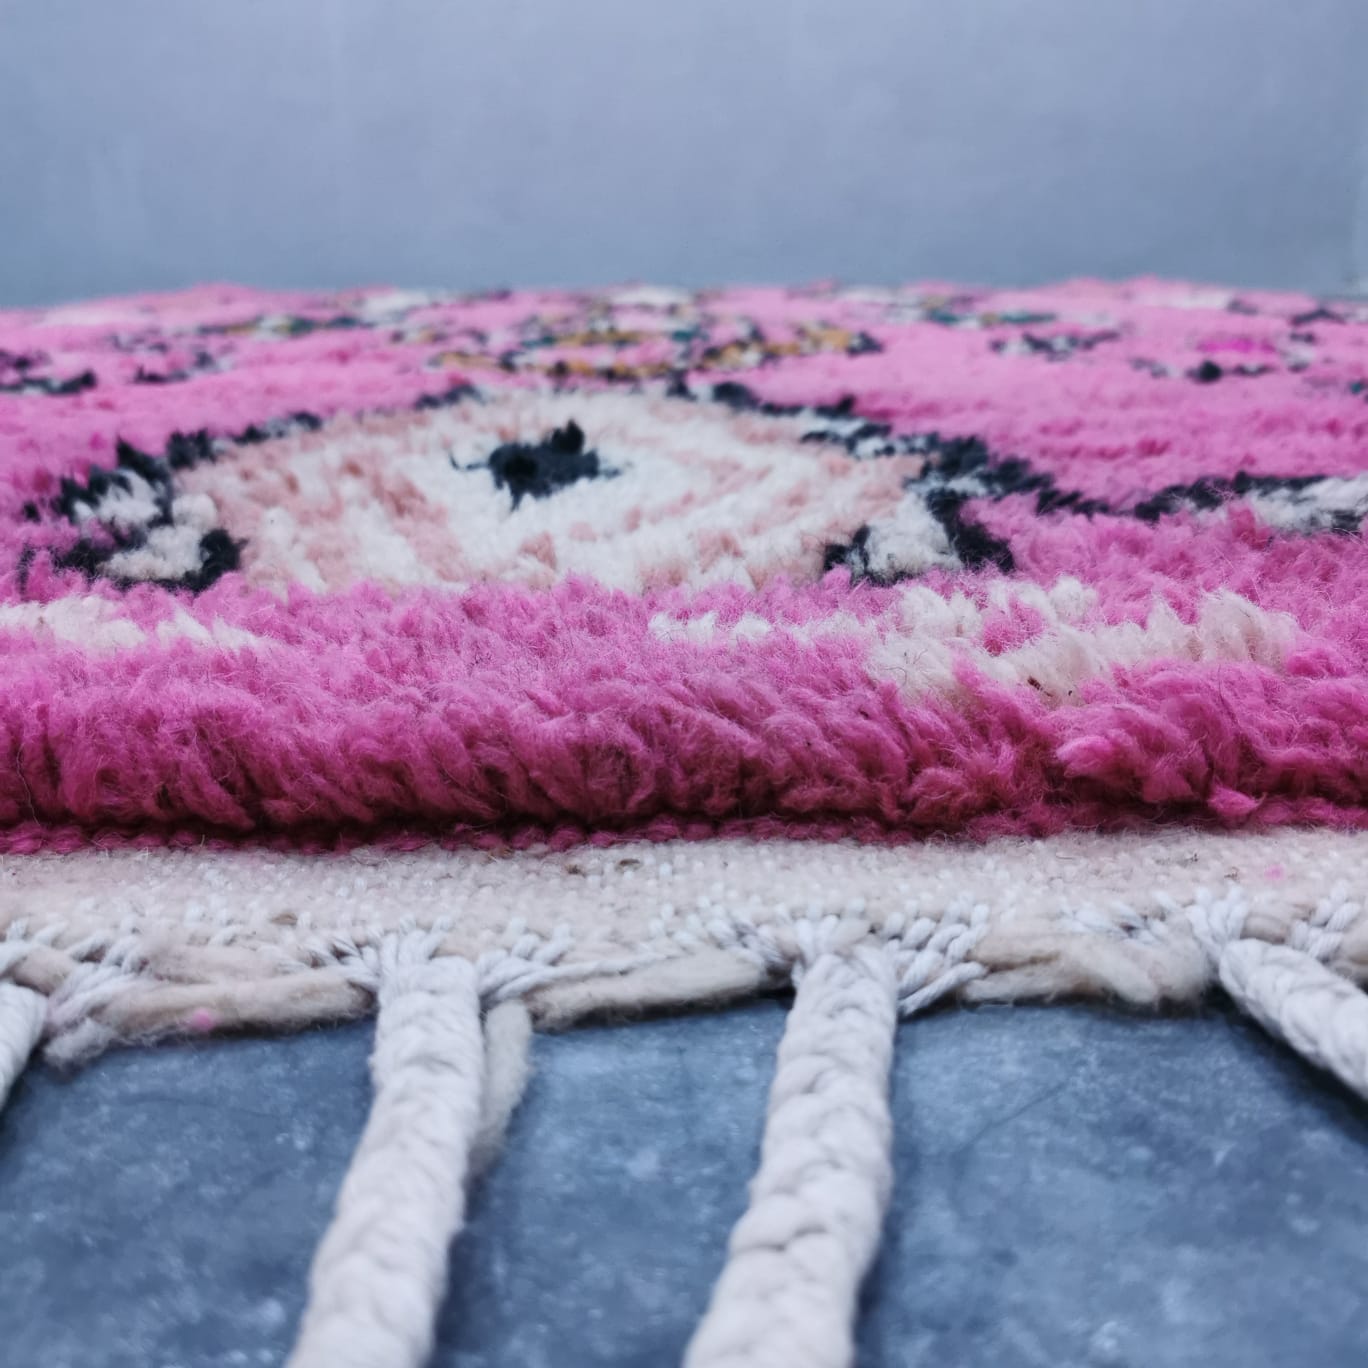 Shop High-Quality Moroccan Rugs and Décor Modern and Vintage Designs